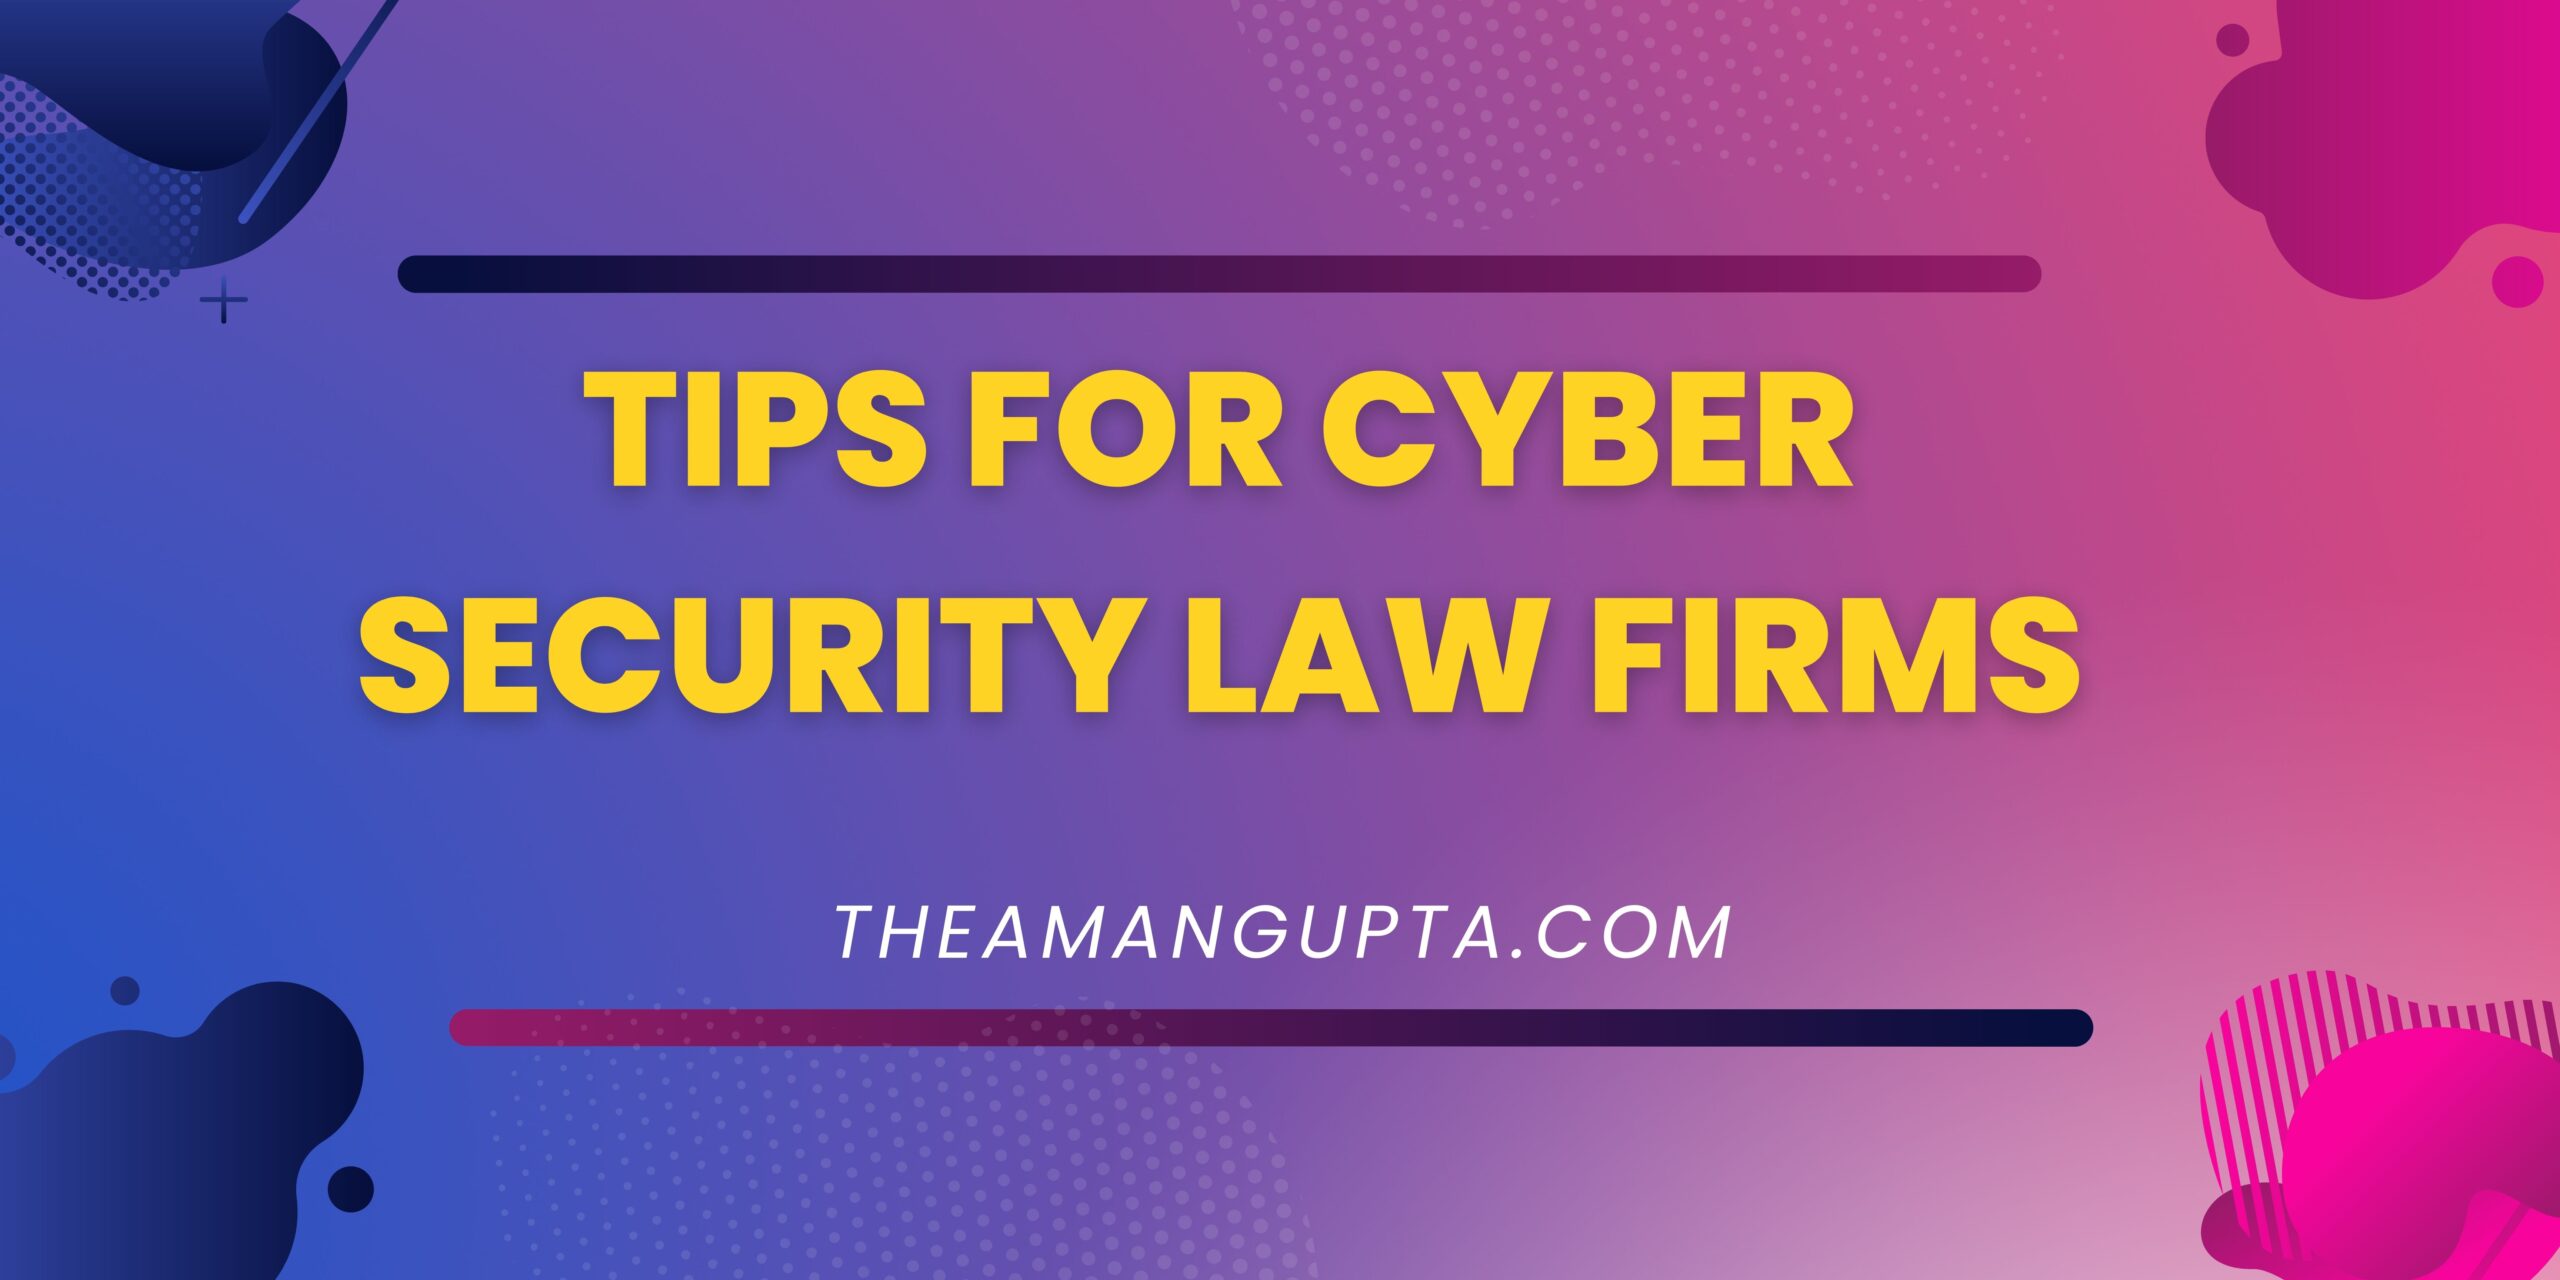 Tips For Cyber Security Law Firms|Cyber Security|Theamangupta|Theamangupta